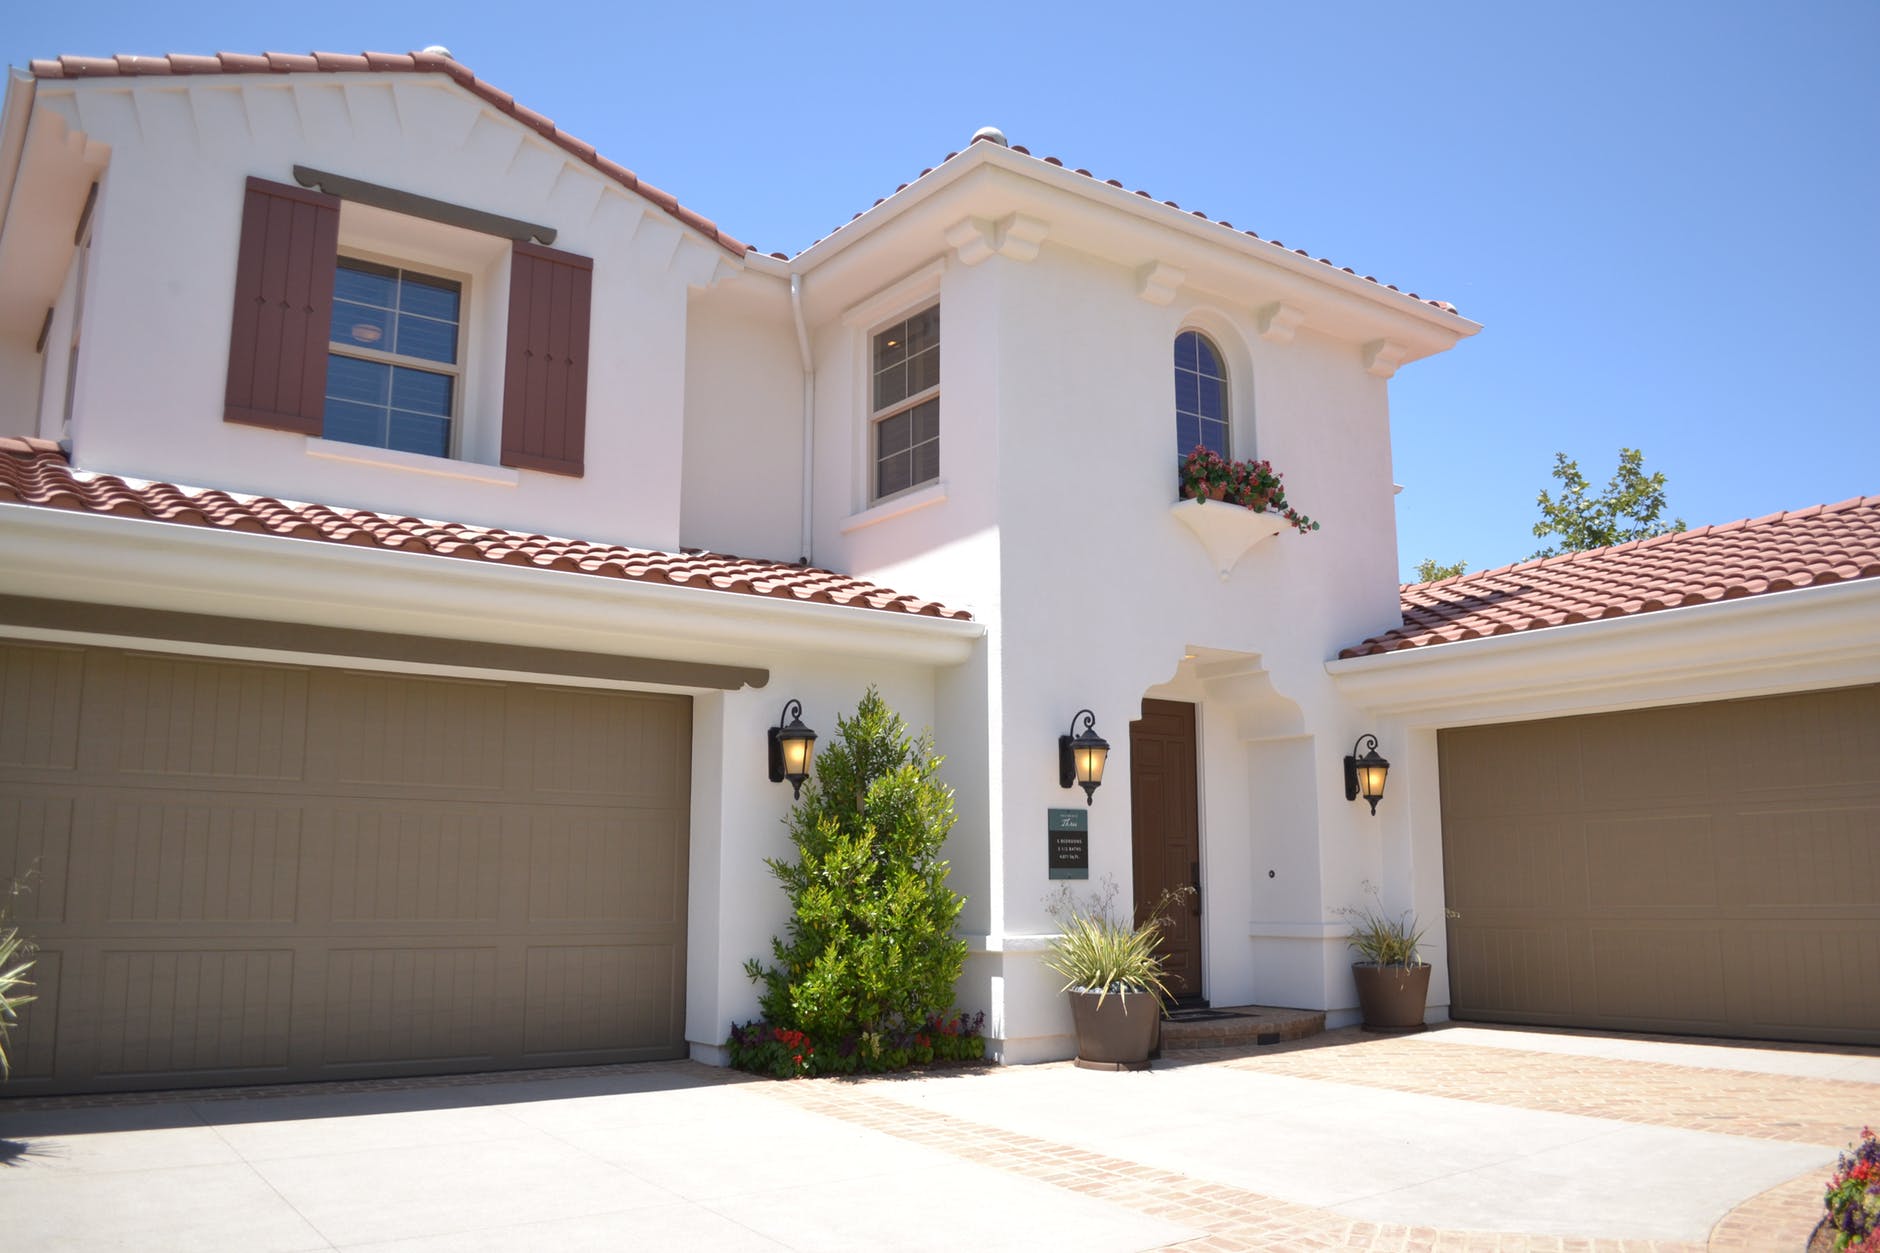 What Are The Best Renovations That You Should Make To Your Las Vegas Rental Property?